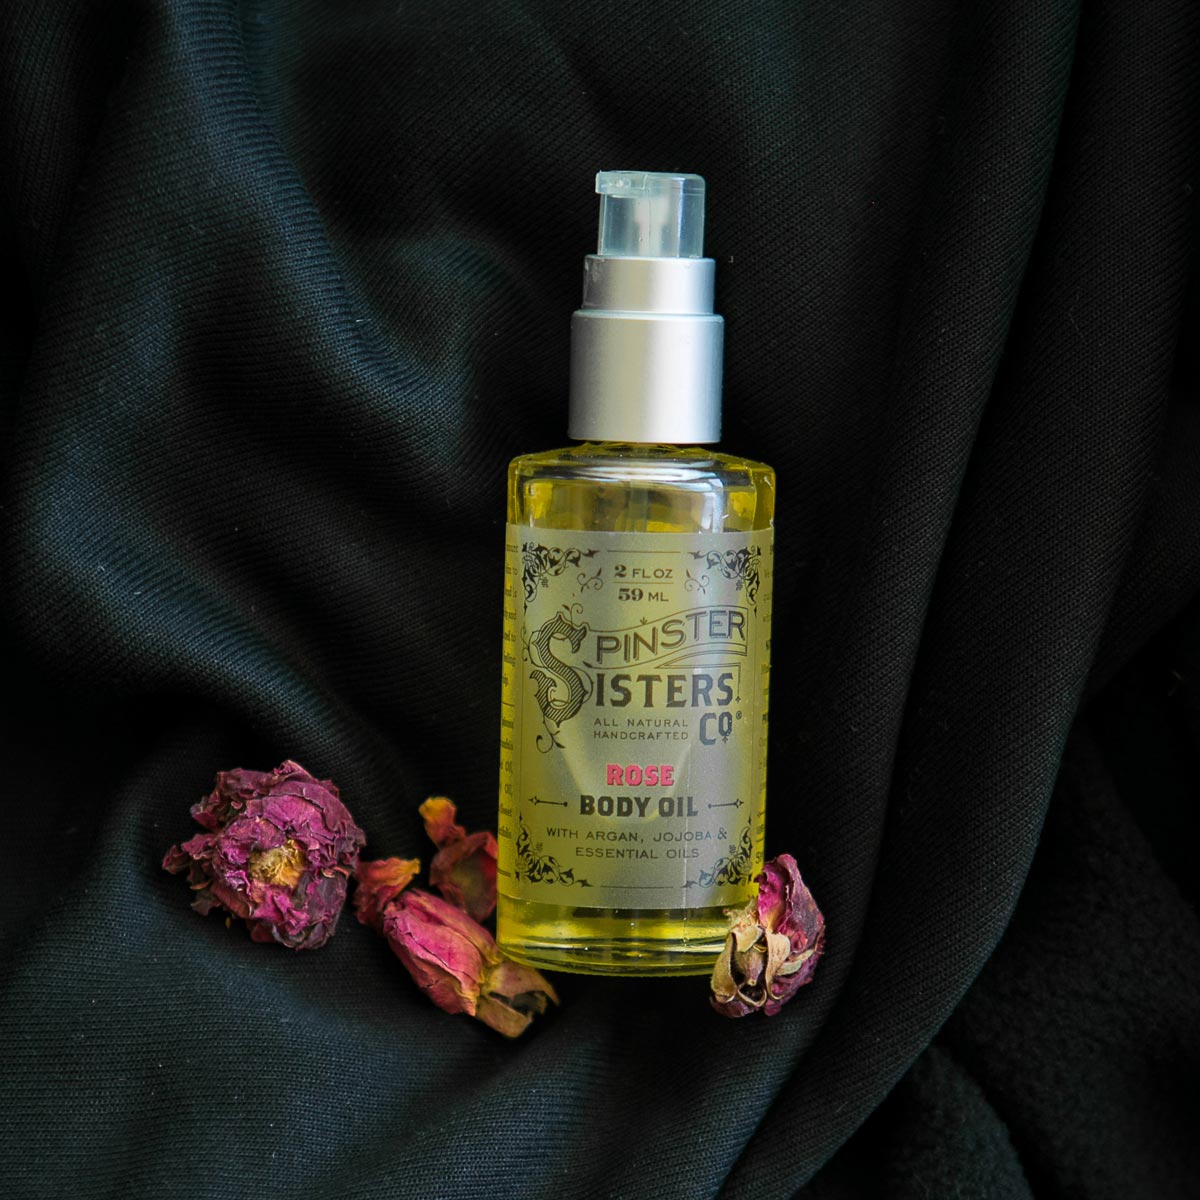 A clear bottle of yellow-hued Body Oil styled with dried rose petals